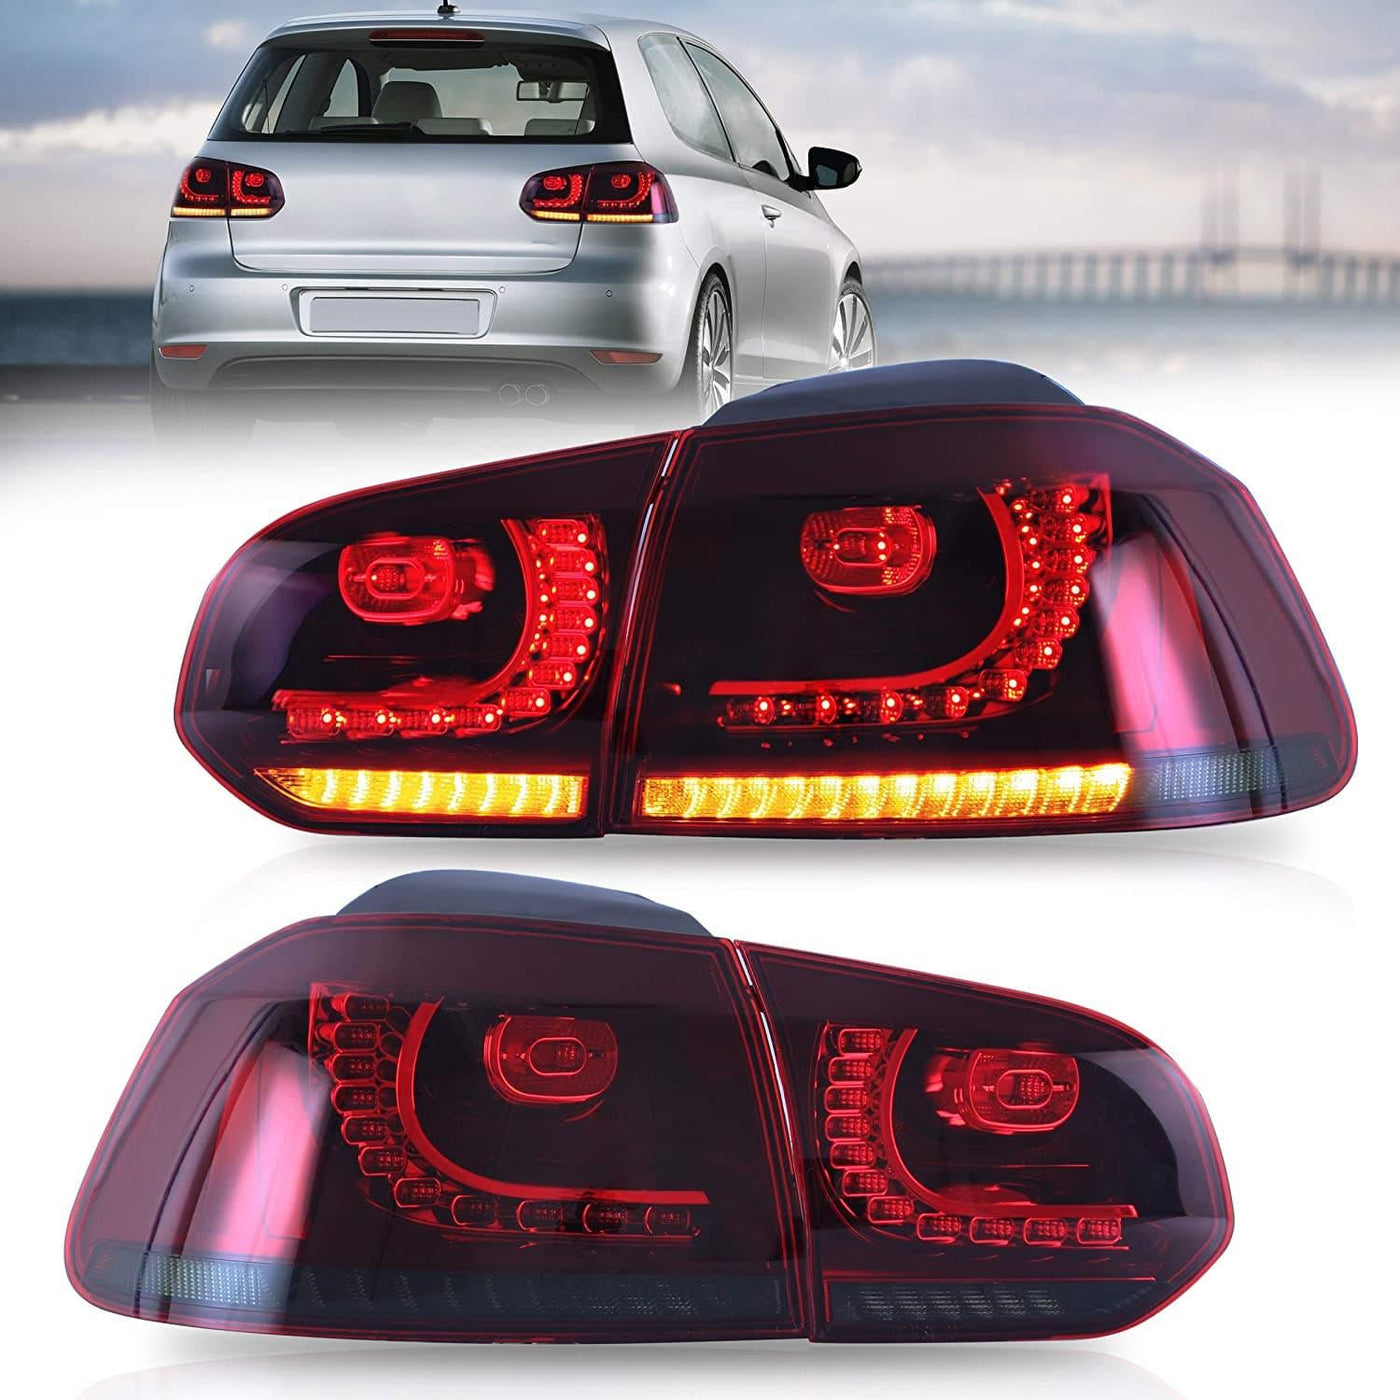 VLAND LED Tail lights For Volkswagen (VW) Golf 6 MK6 (TSI GTI R TDI GTD LPG) 2008-2014 With Sequential indicators[E-MARK]